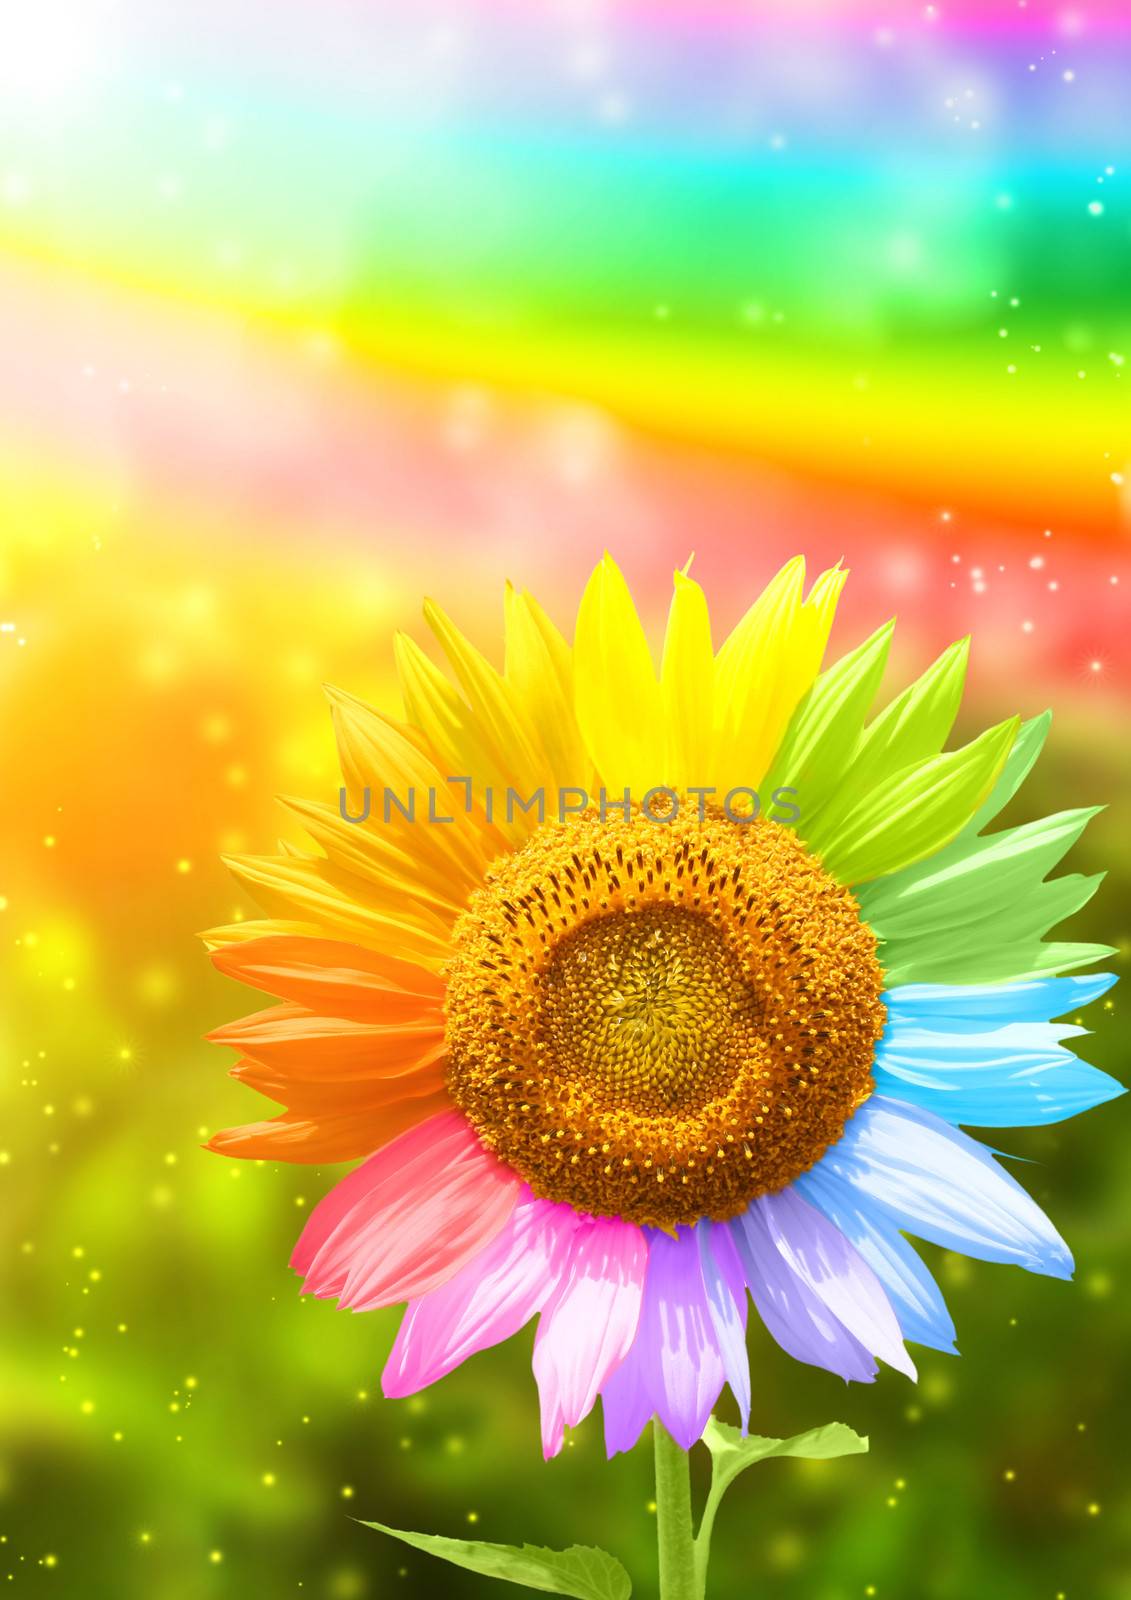 Sunflower painted in different colors by frenta